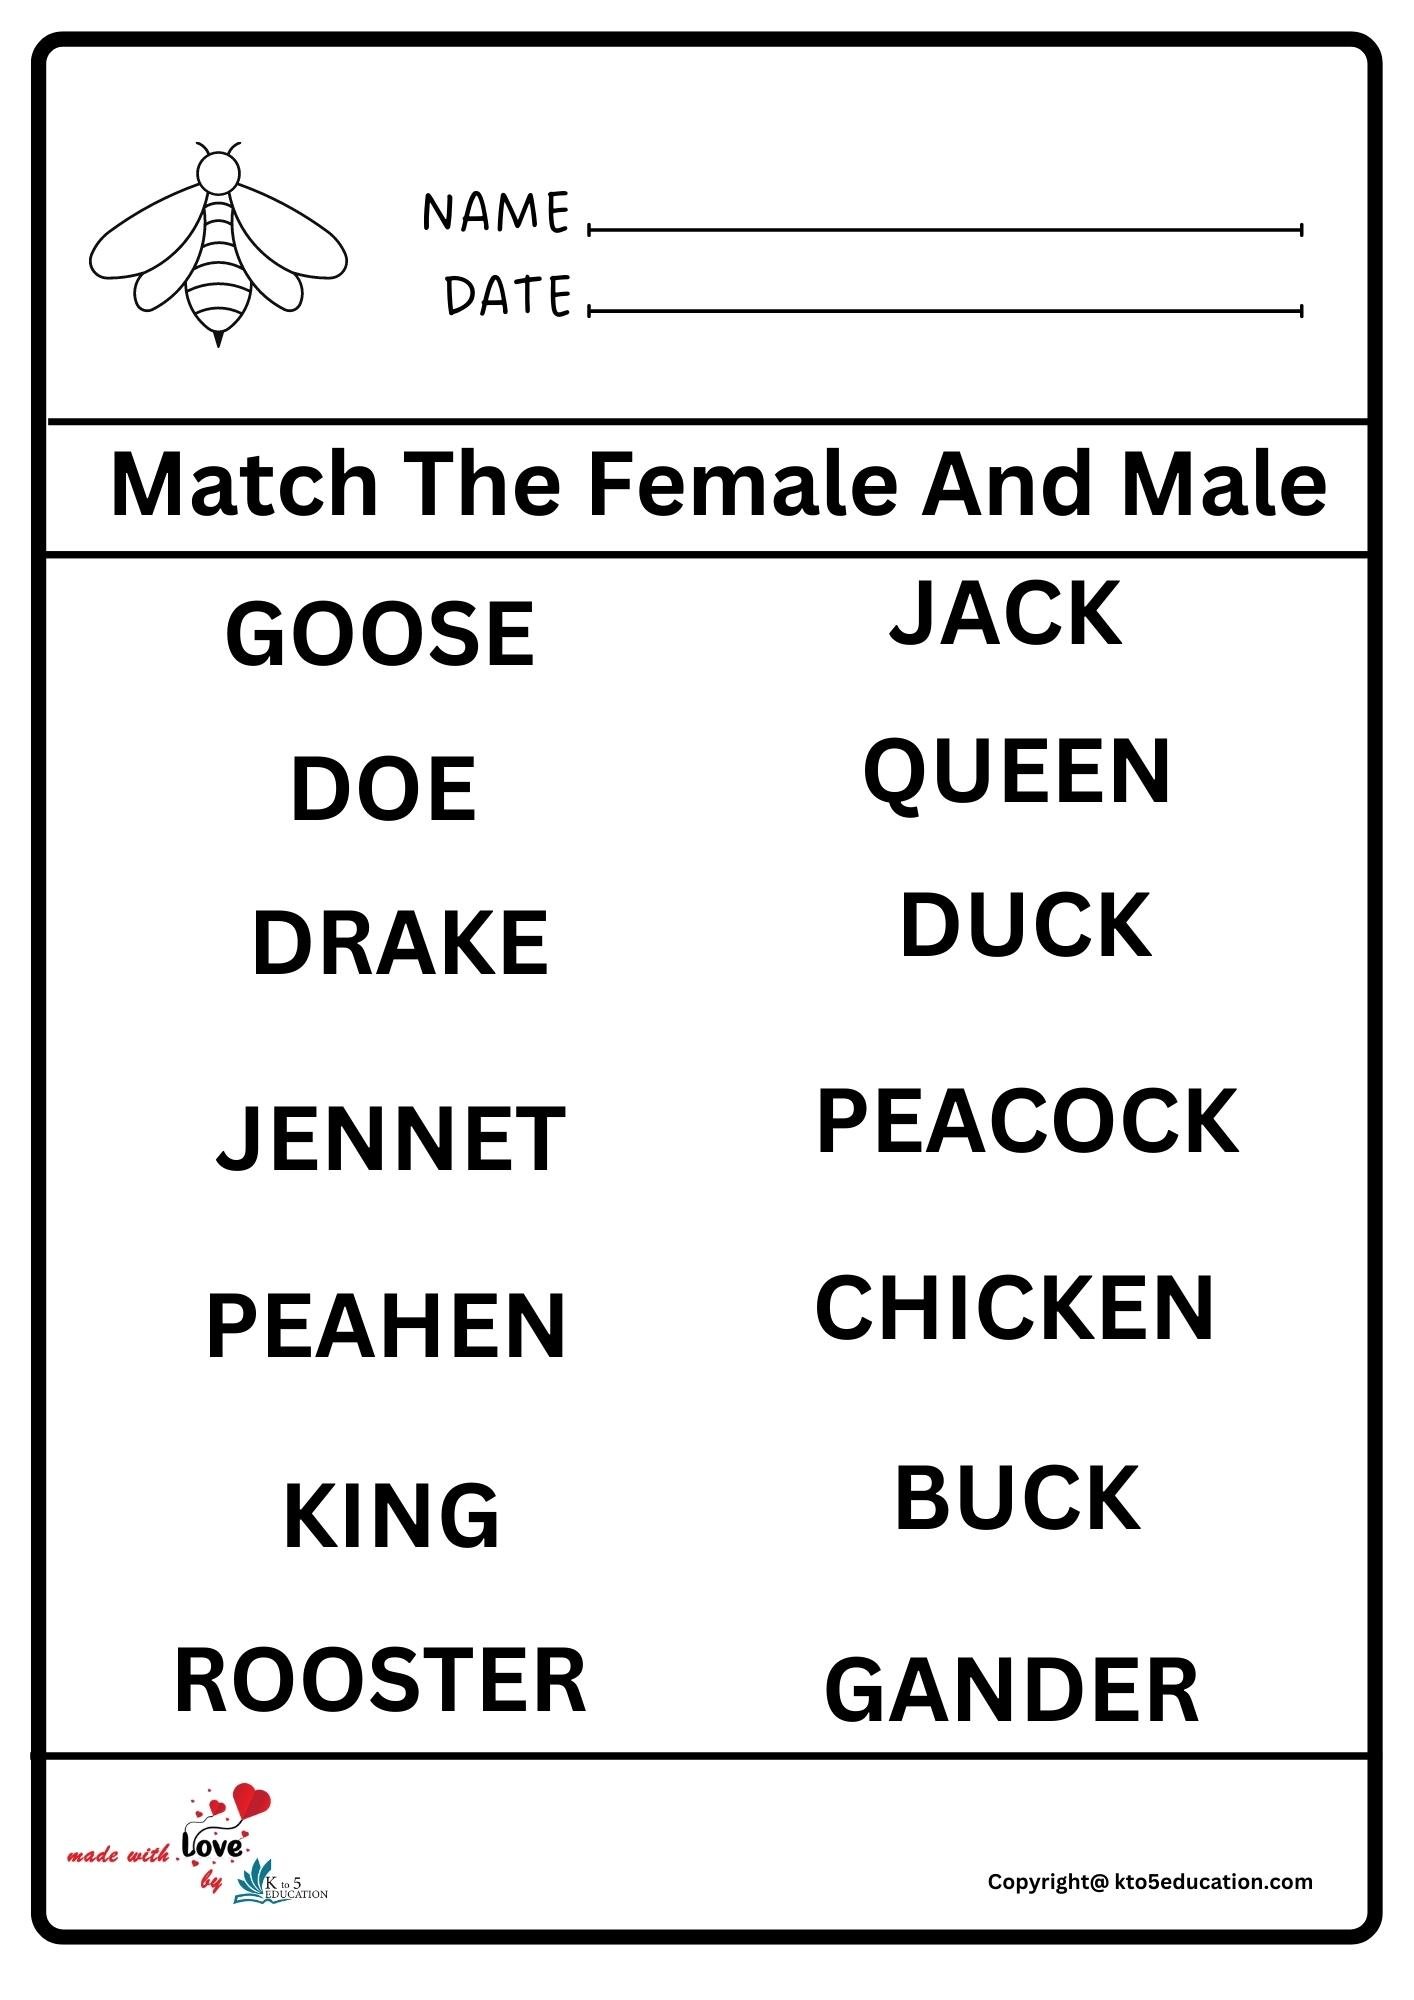 Match The Female And Male Worksheet